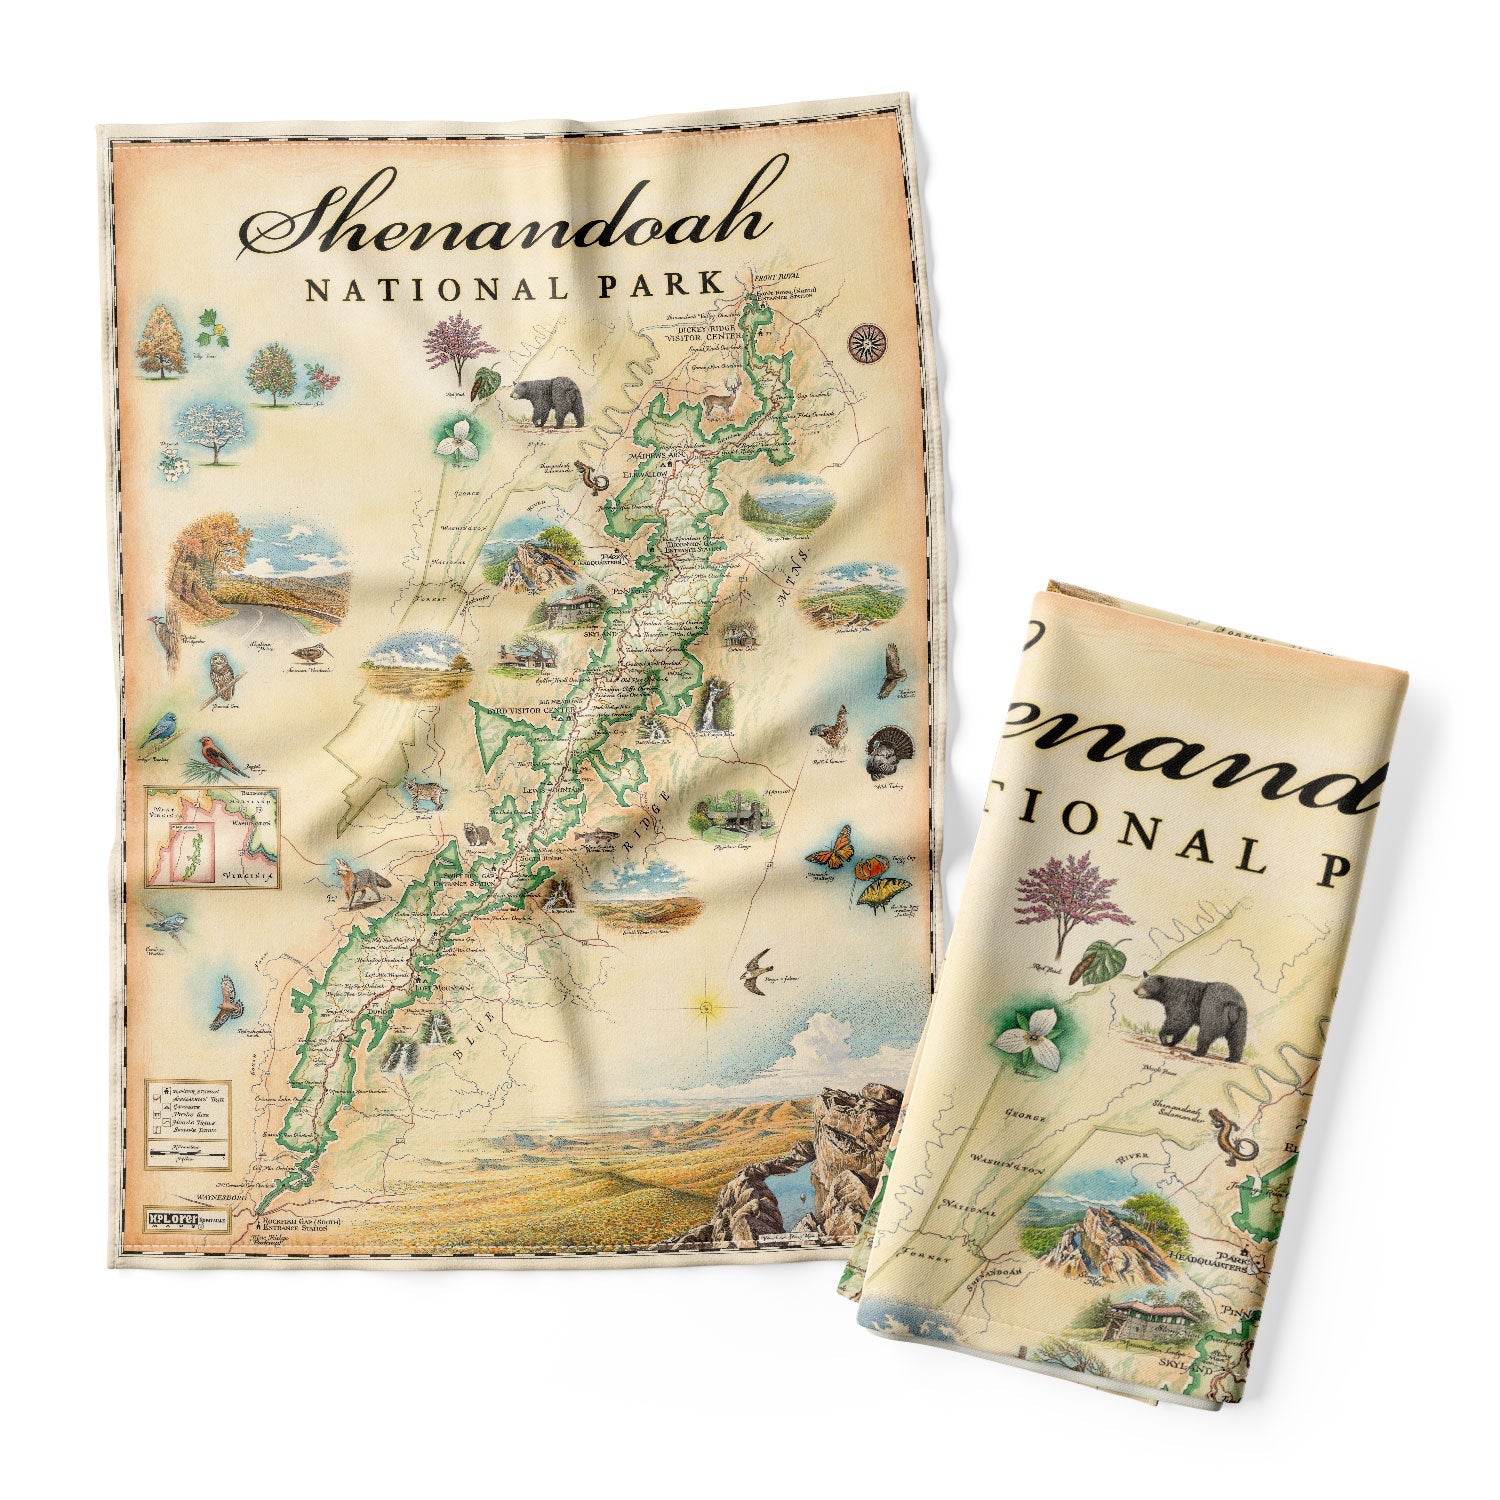 Shenandoah National Park Map Kitchen Towels in earth tones beige and green. The illustrations include places such as Skyline Drive, Byrd Visitor center, and Big Meadows Lodge. Flora and fauna include a bobcat, wild turkey, trillium flowers, and a dogwood tree. 